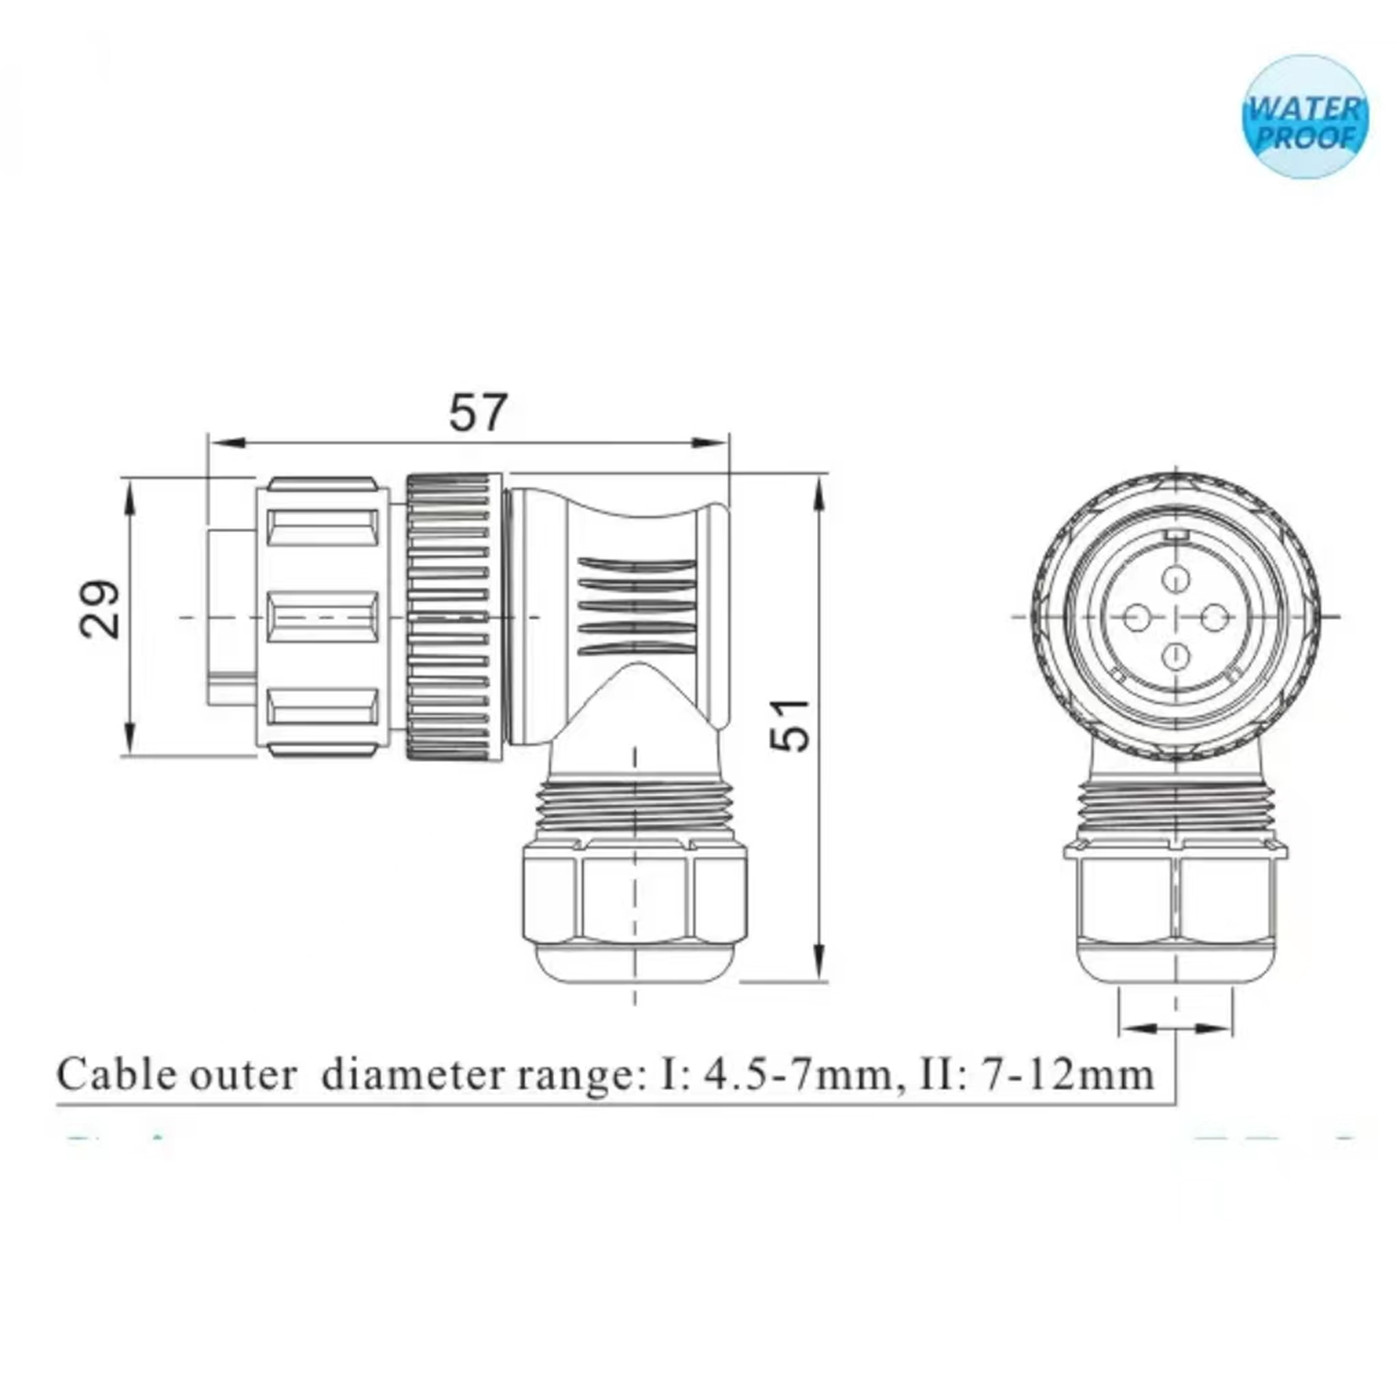 SP2116 Male 2 3 4 5 7 9 12Pin Plastic Industrial Waterproof Electrical Right Angle Connector-01 (2)